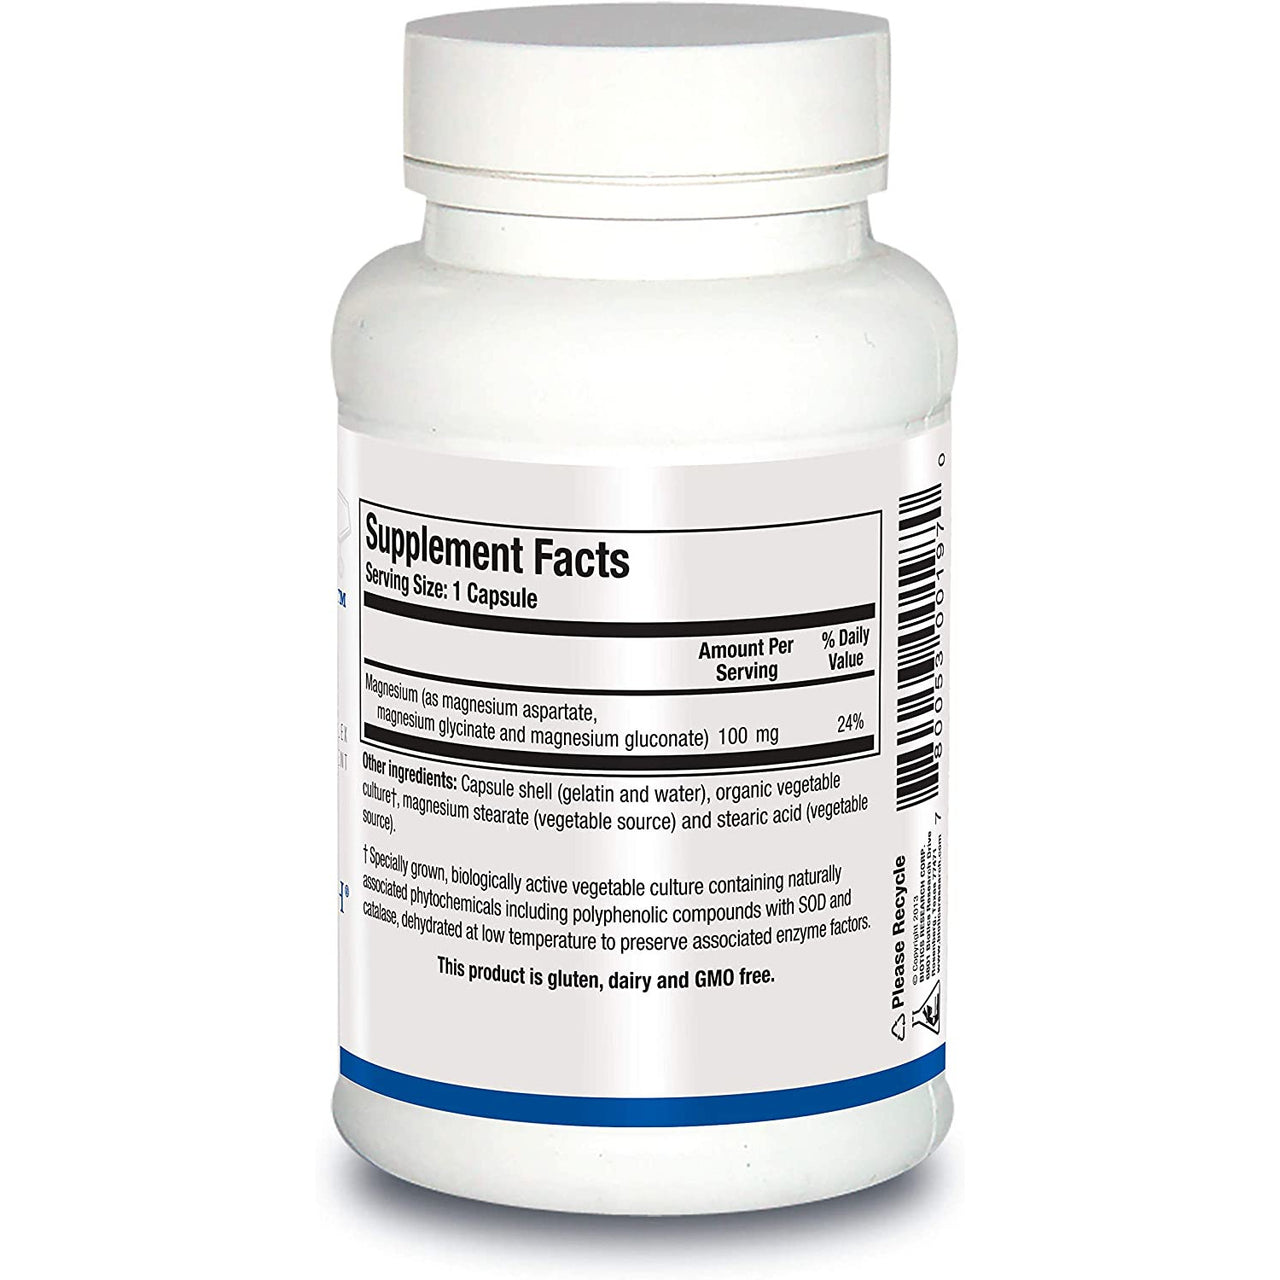 Mg-Zyme - Biotics Research - Source of mixed mineral magnesium chelates - Aspartate, Glycinate, Gluconate